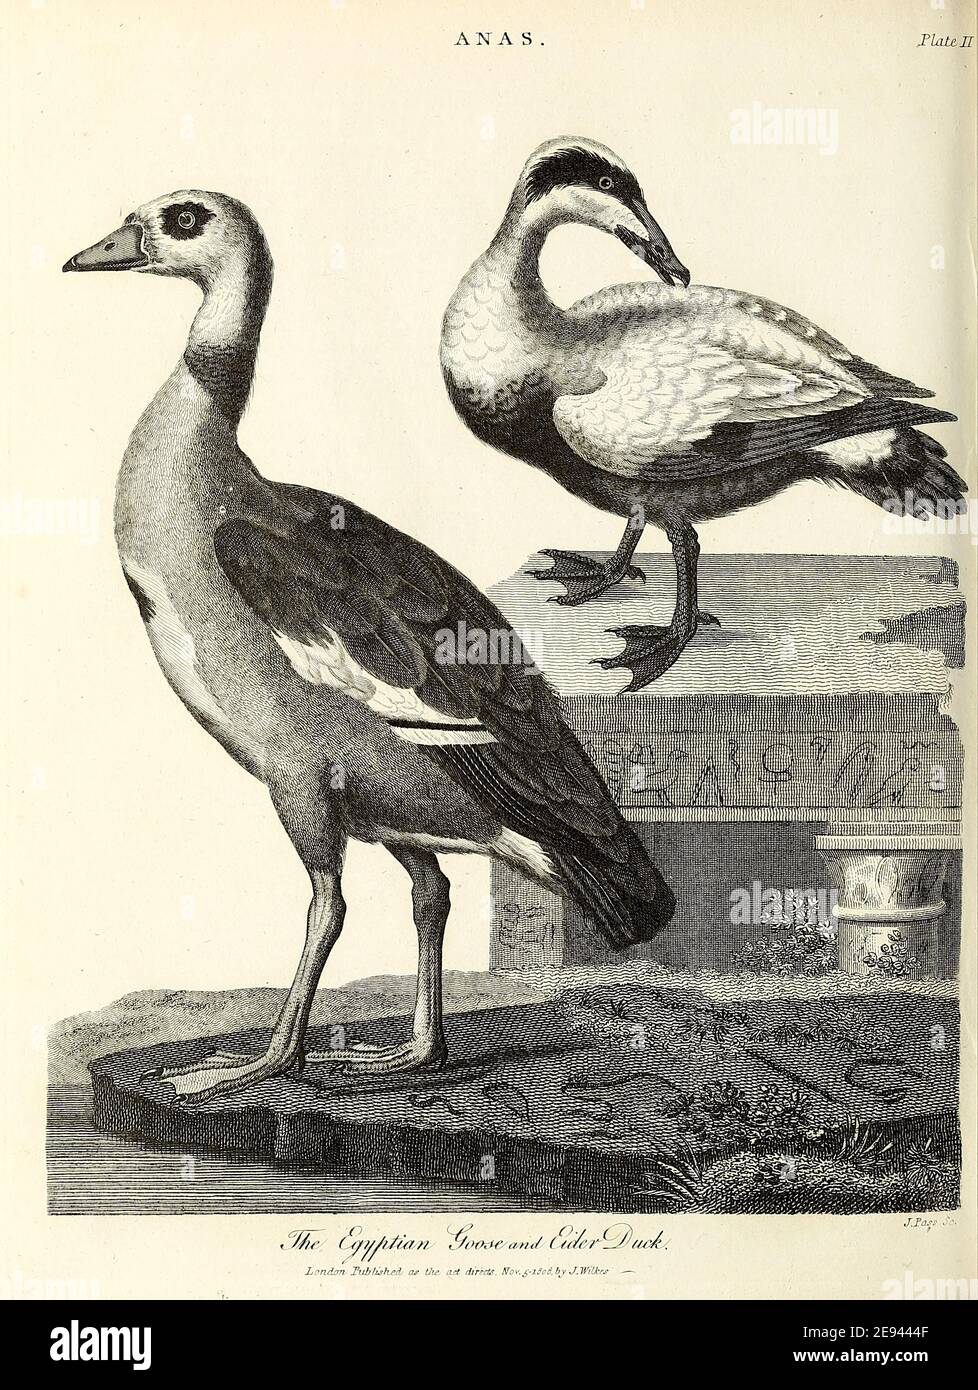 Egyptian Goose [Alopochen aegyptiaca] (Left) and Eider Duck [common eider (Somateria mollissima), also called St. Cuthbert's duck or Cuddy's duck], Copperplate engraving From the Encyclopaedia Londinensis or, Universal dictionary of arts, sciences, and literature; Volume I;  Edited by Wilkes, John. Published in London in 1810 Stock Photo